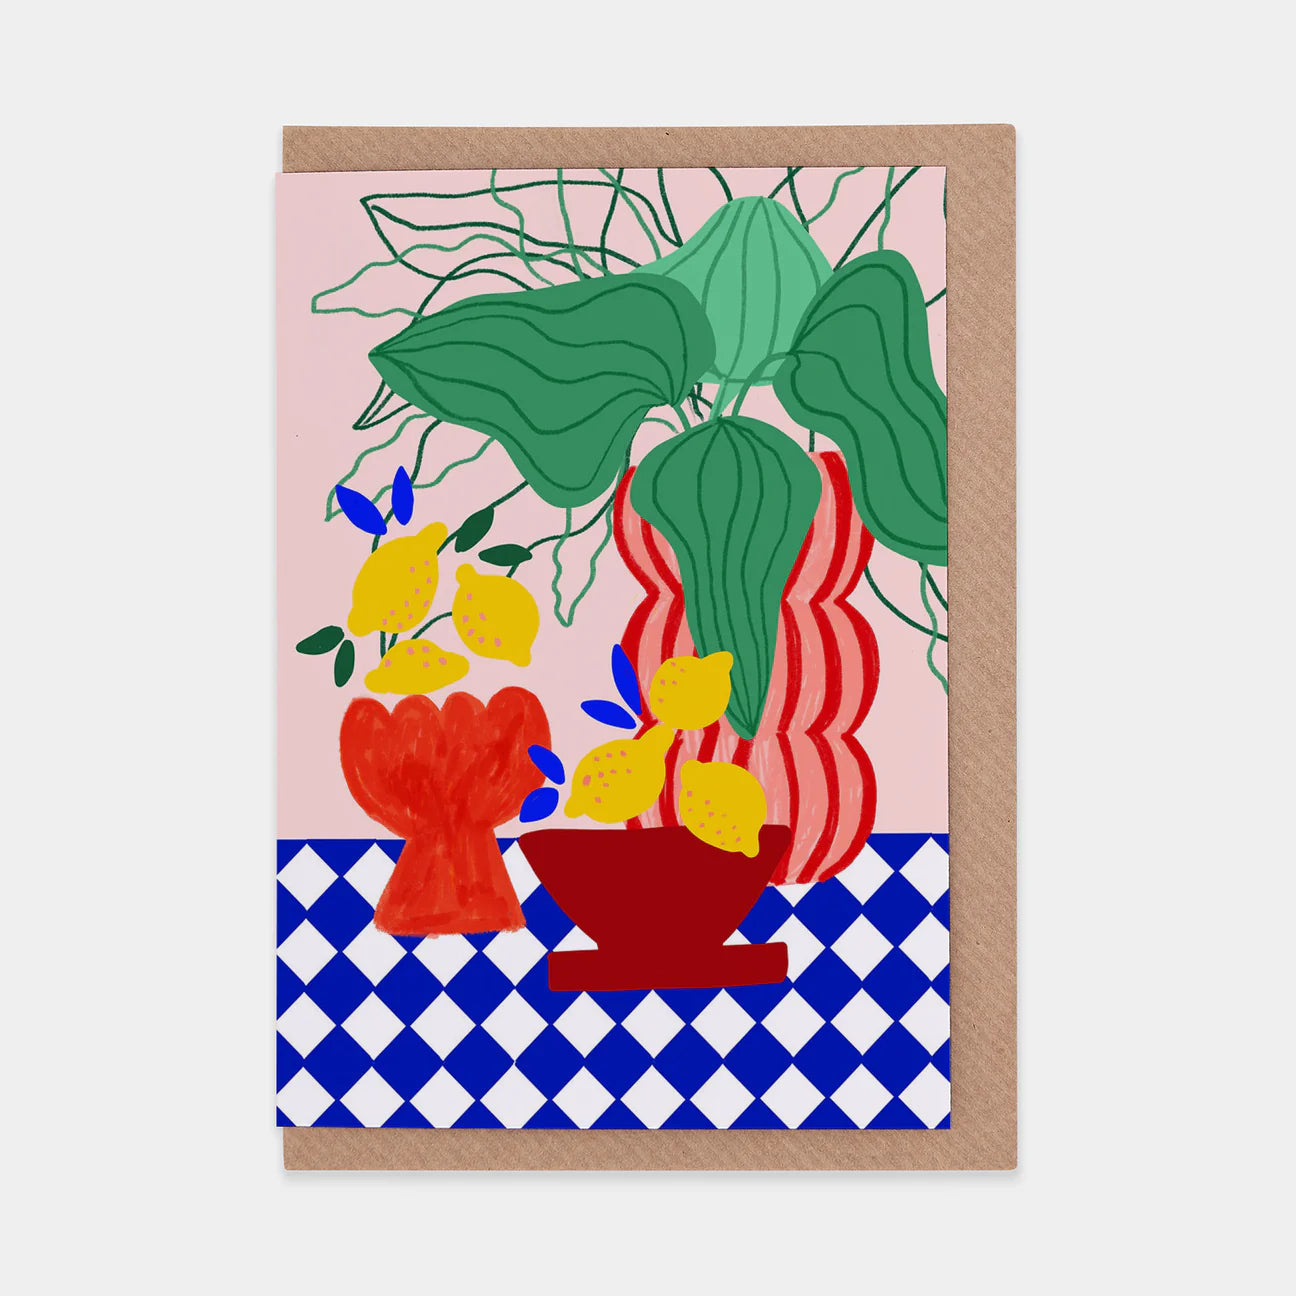 Greetings card with a colourful illustration of a plant on top of a chequered surface